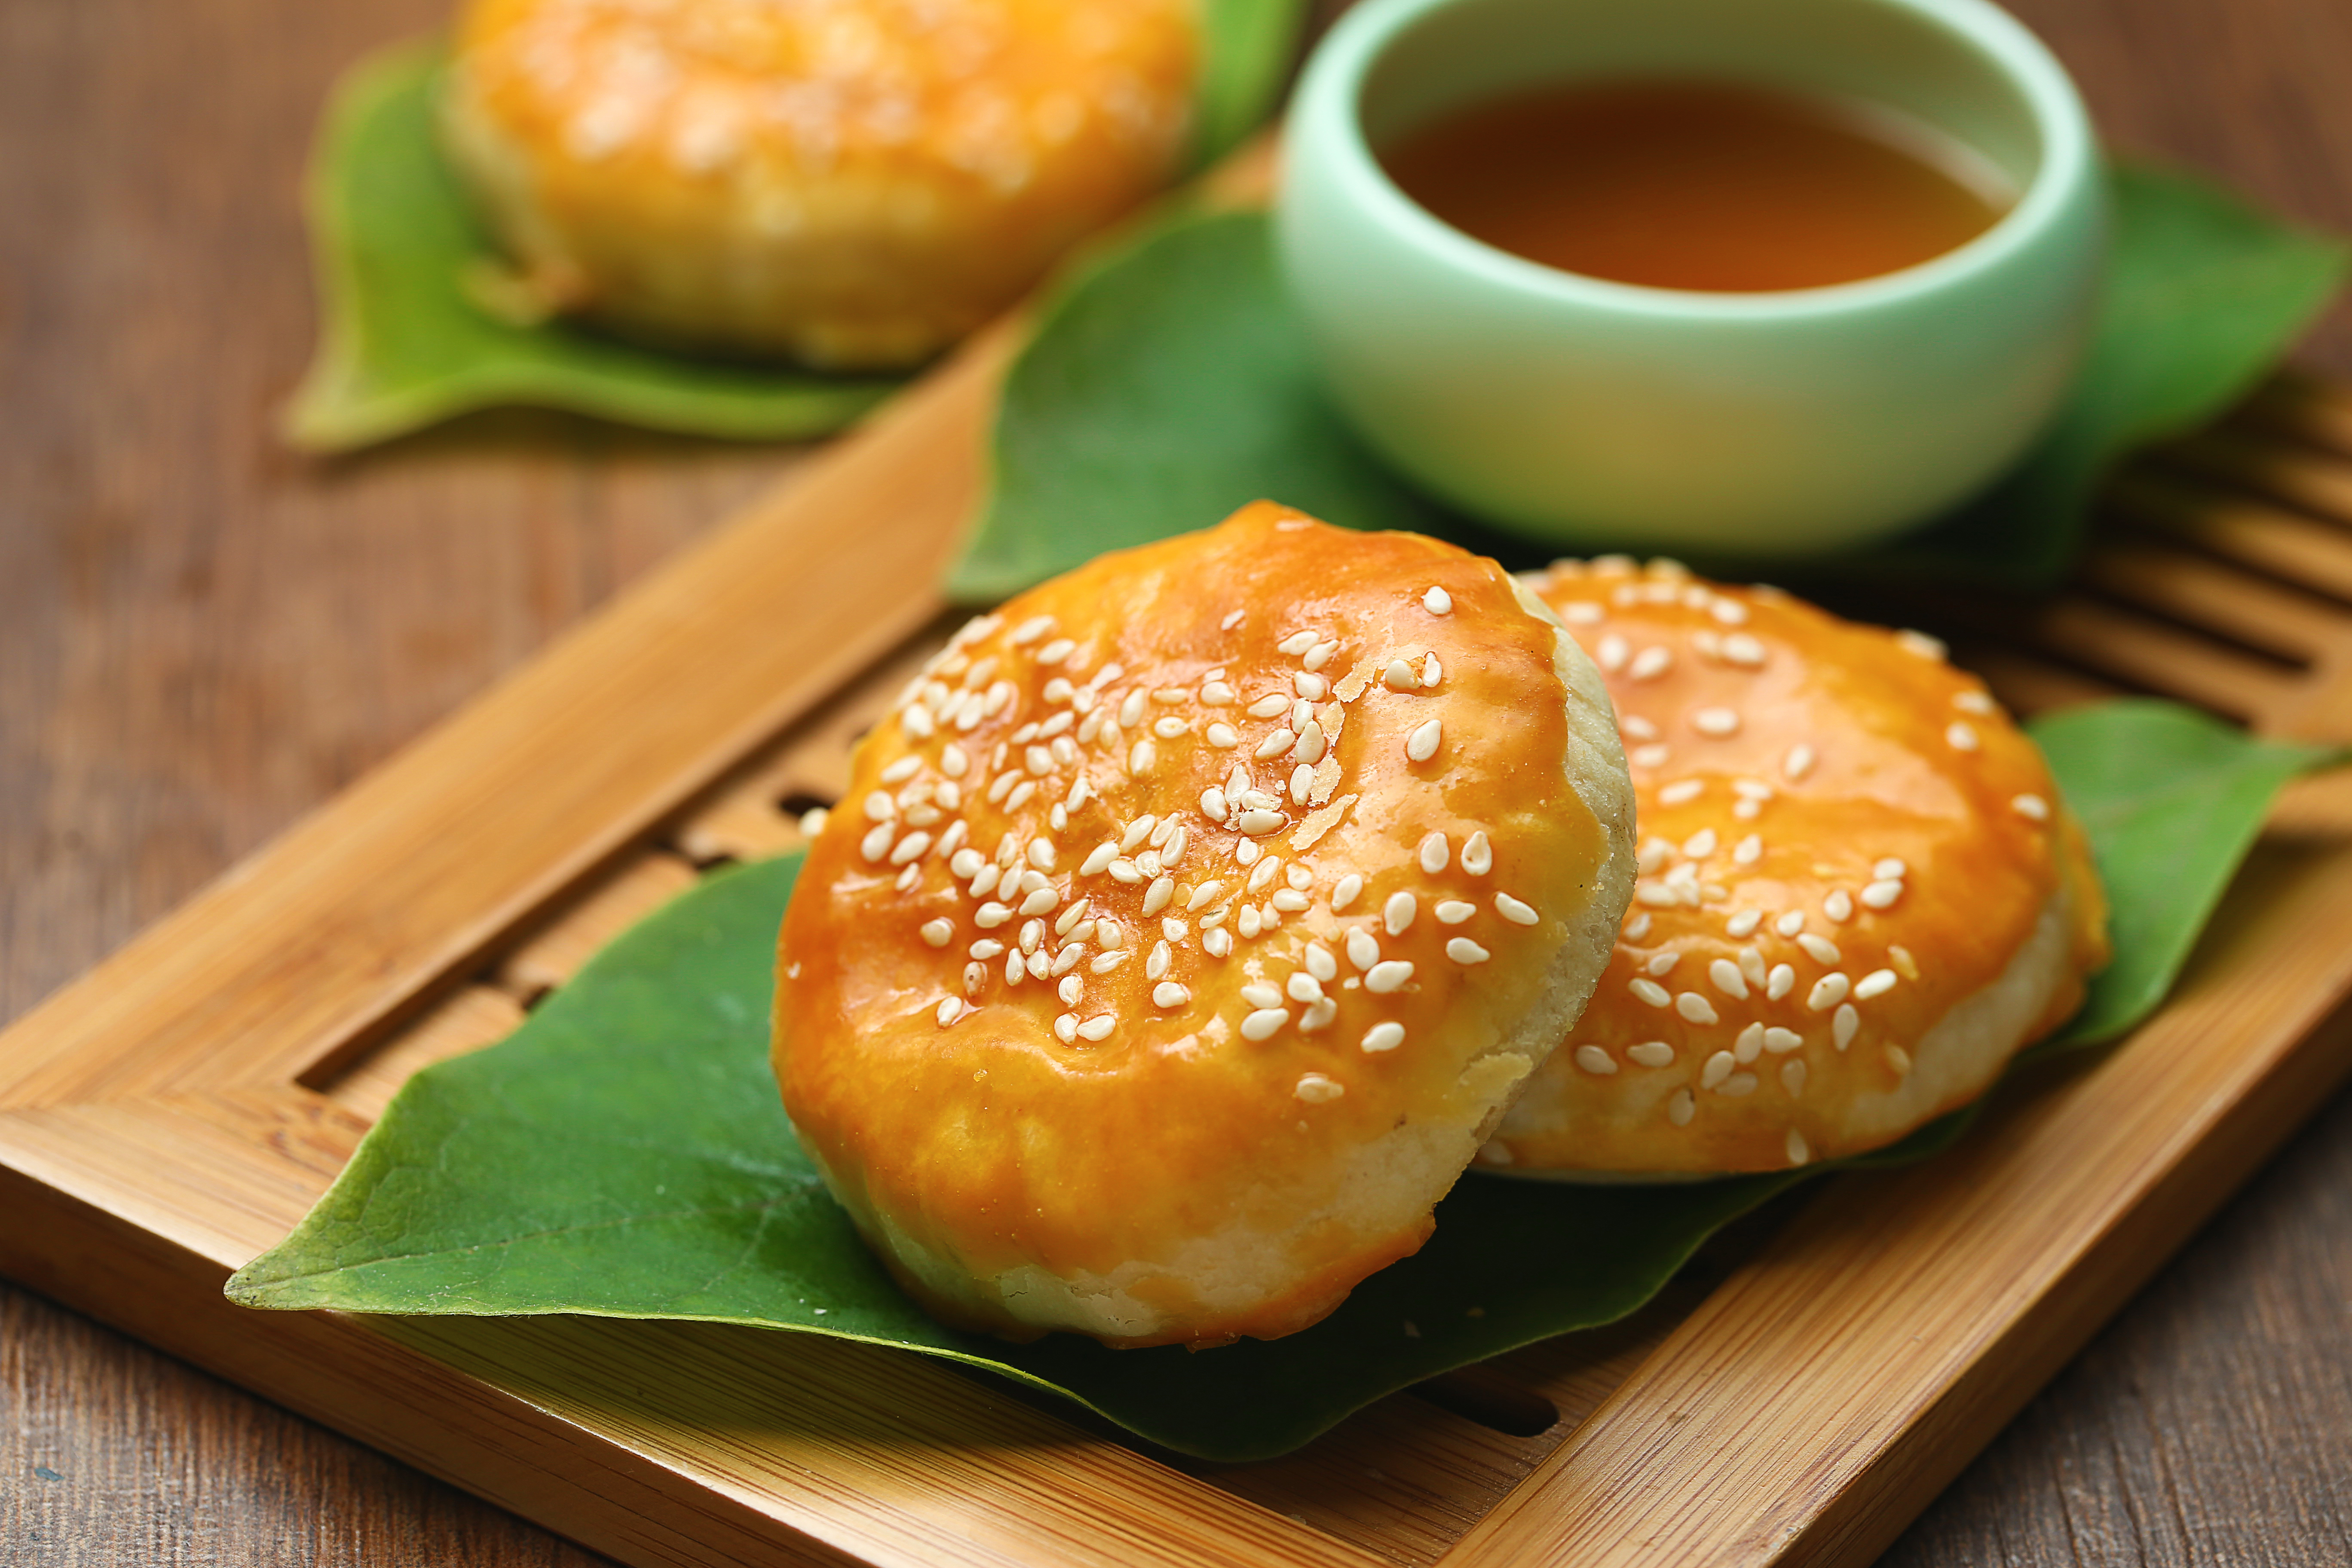 Wife cakes, or sweetheart cakes, sprinkled with sesame are presented on a palm leaf with tea.